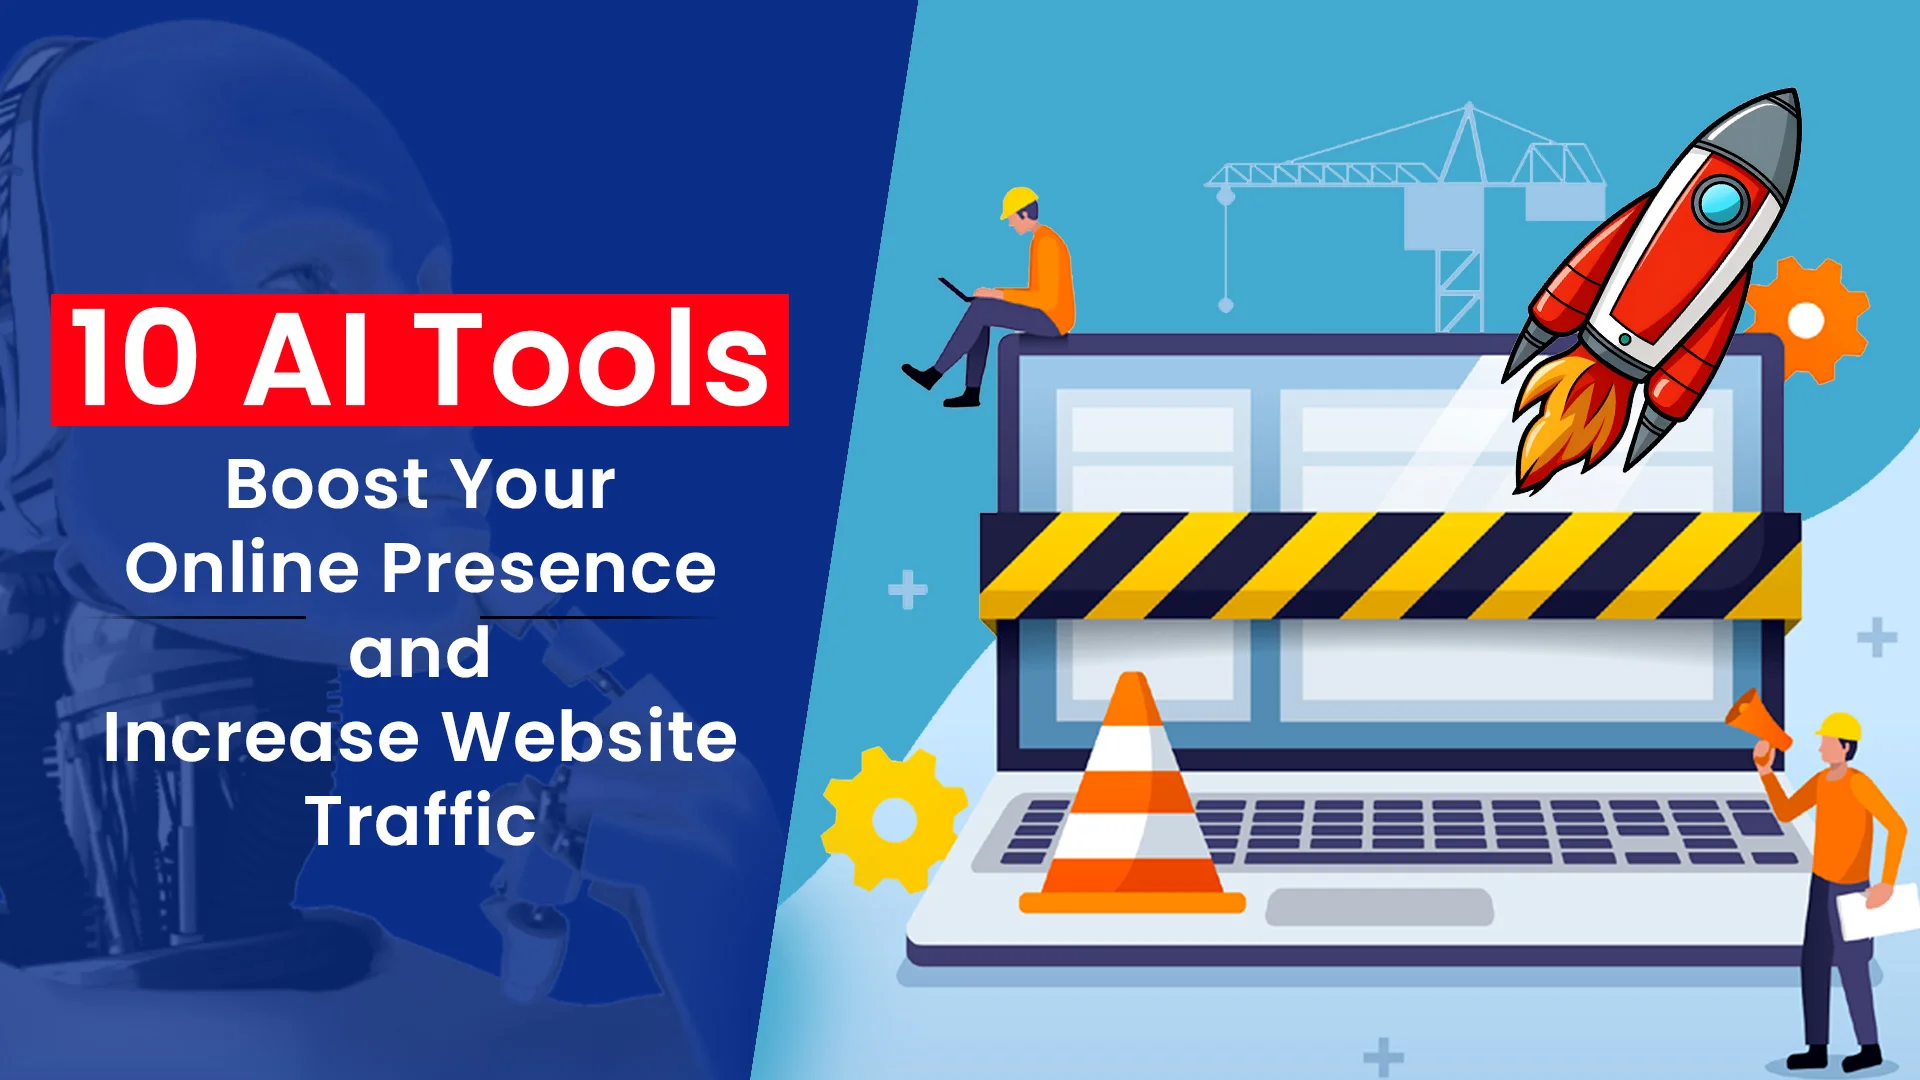 Increase Website Traffic, Boost Your Online Presence with 10 AI Tools